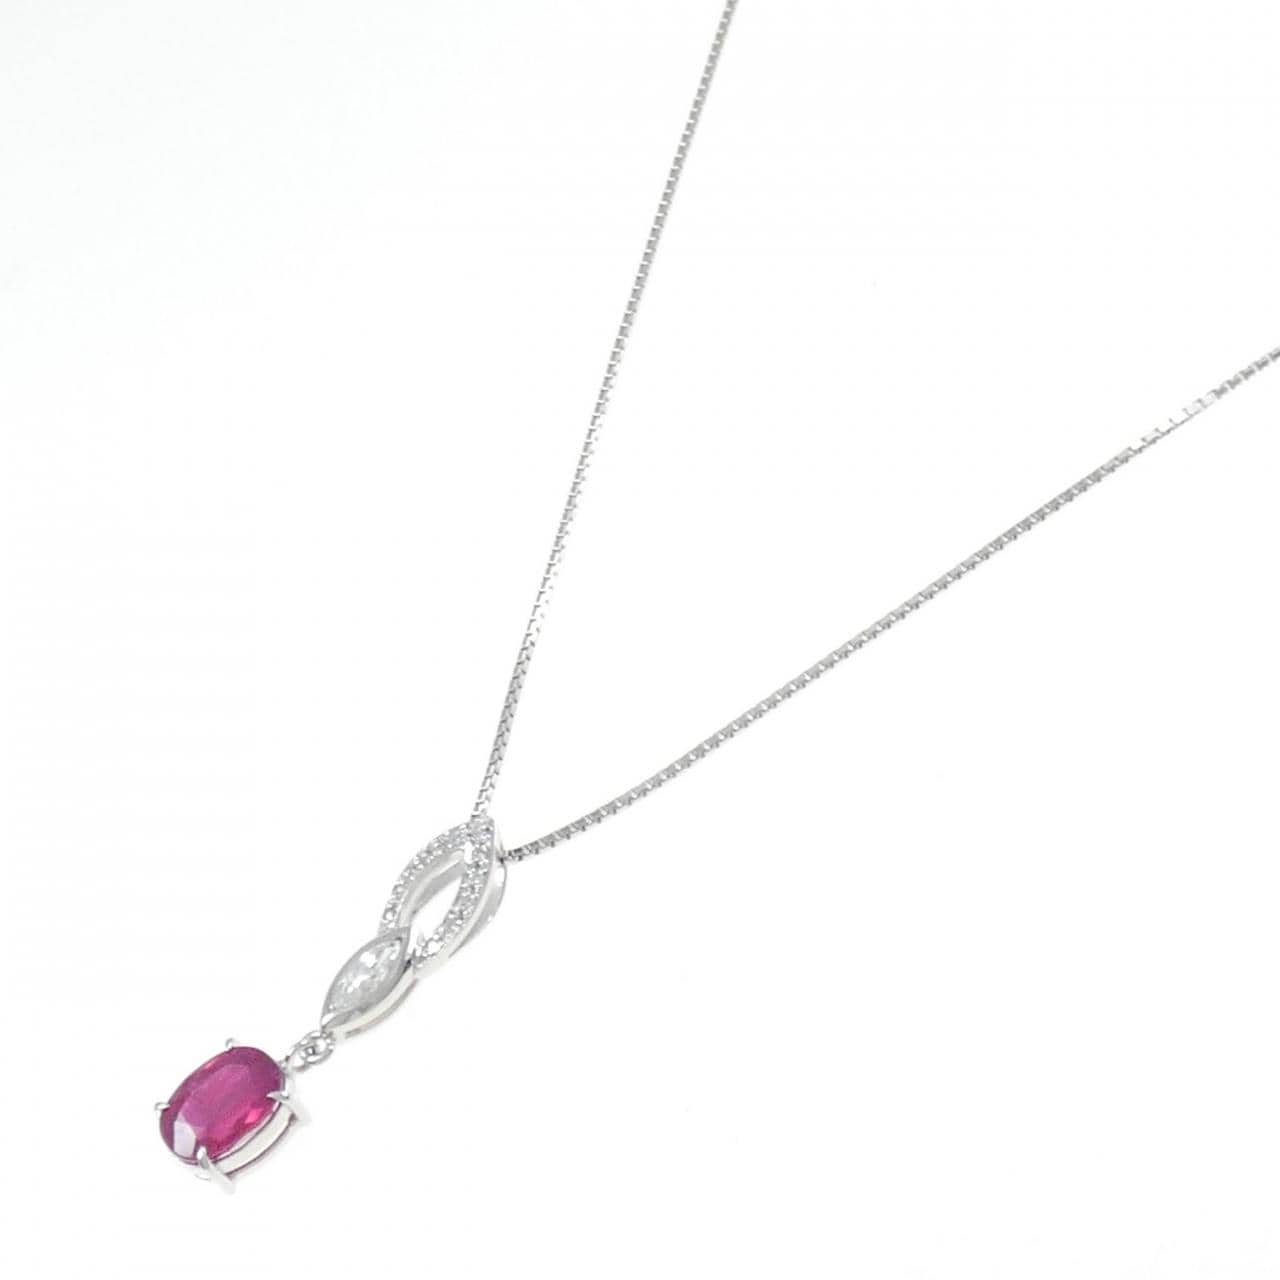 PT Ruby Necklace 2.37CT Burmese